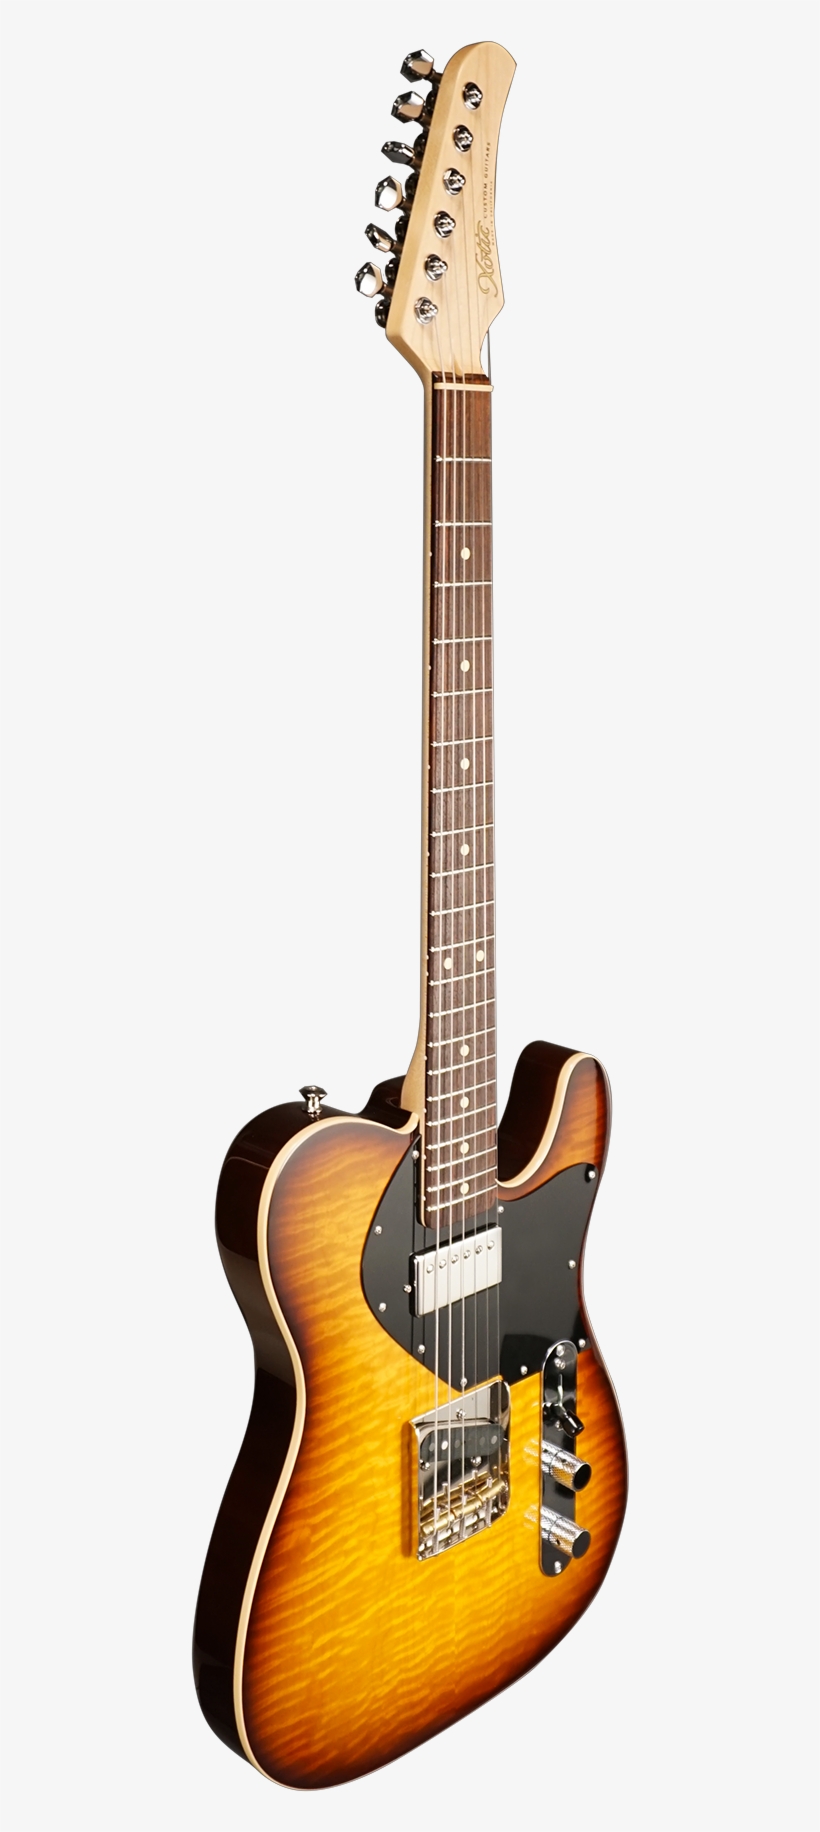 Xt Series Side - Electric Guitar Side View, transparent png #4885279